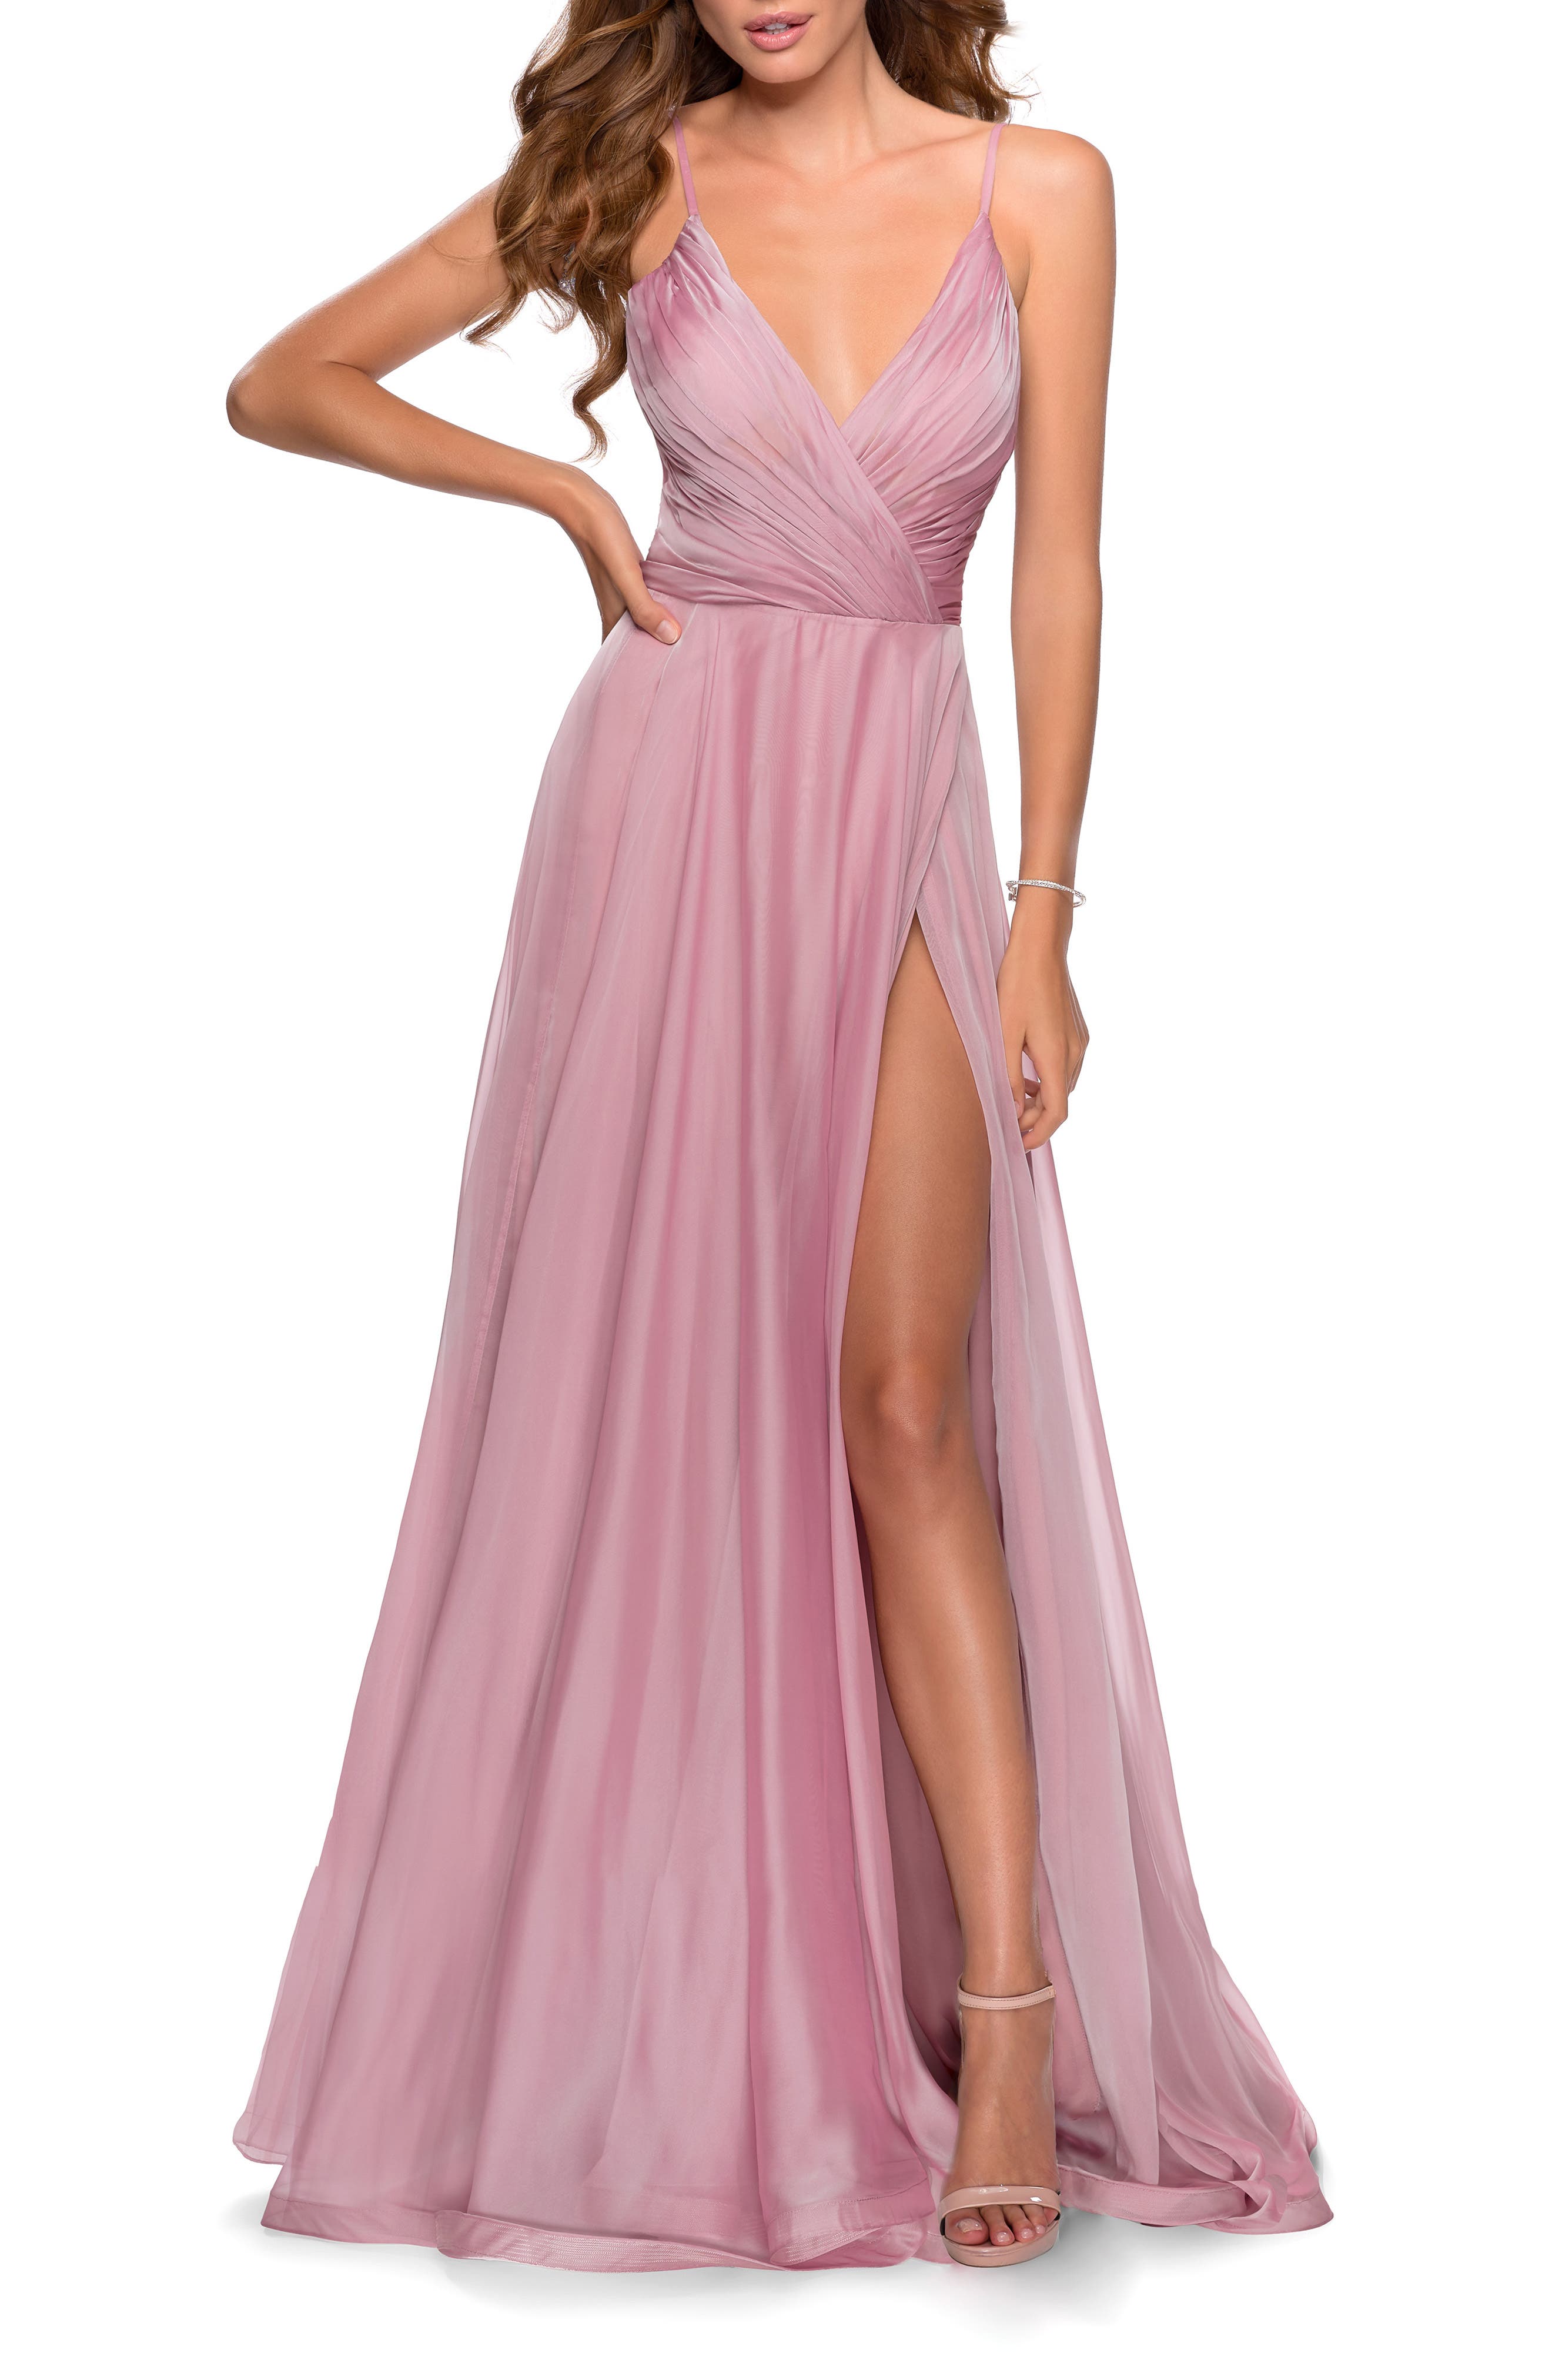 Pink Formal Dresses ☀ Evening Gowns ...